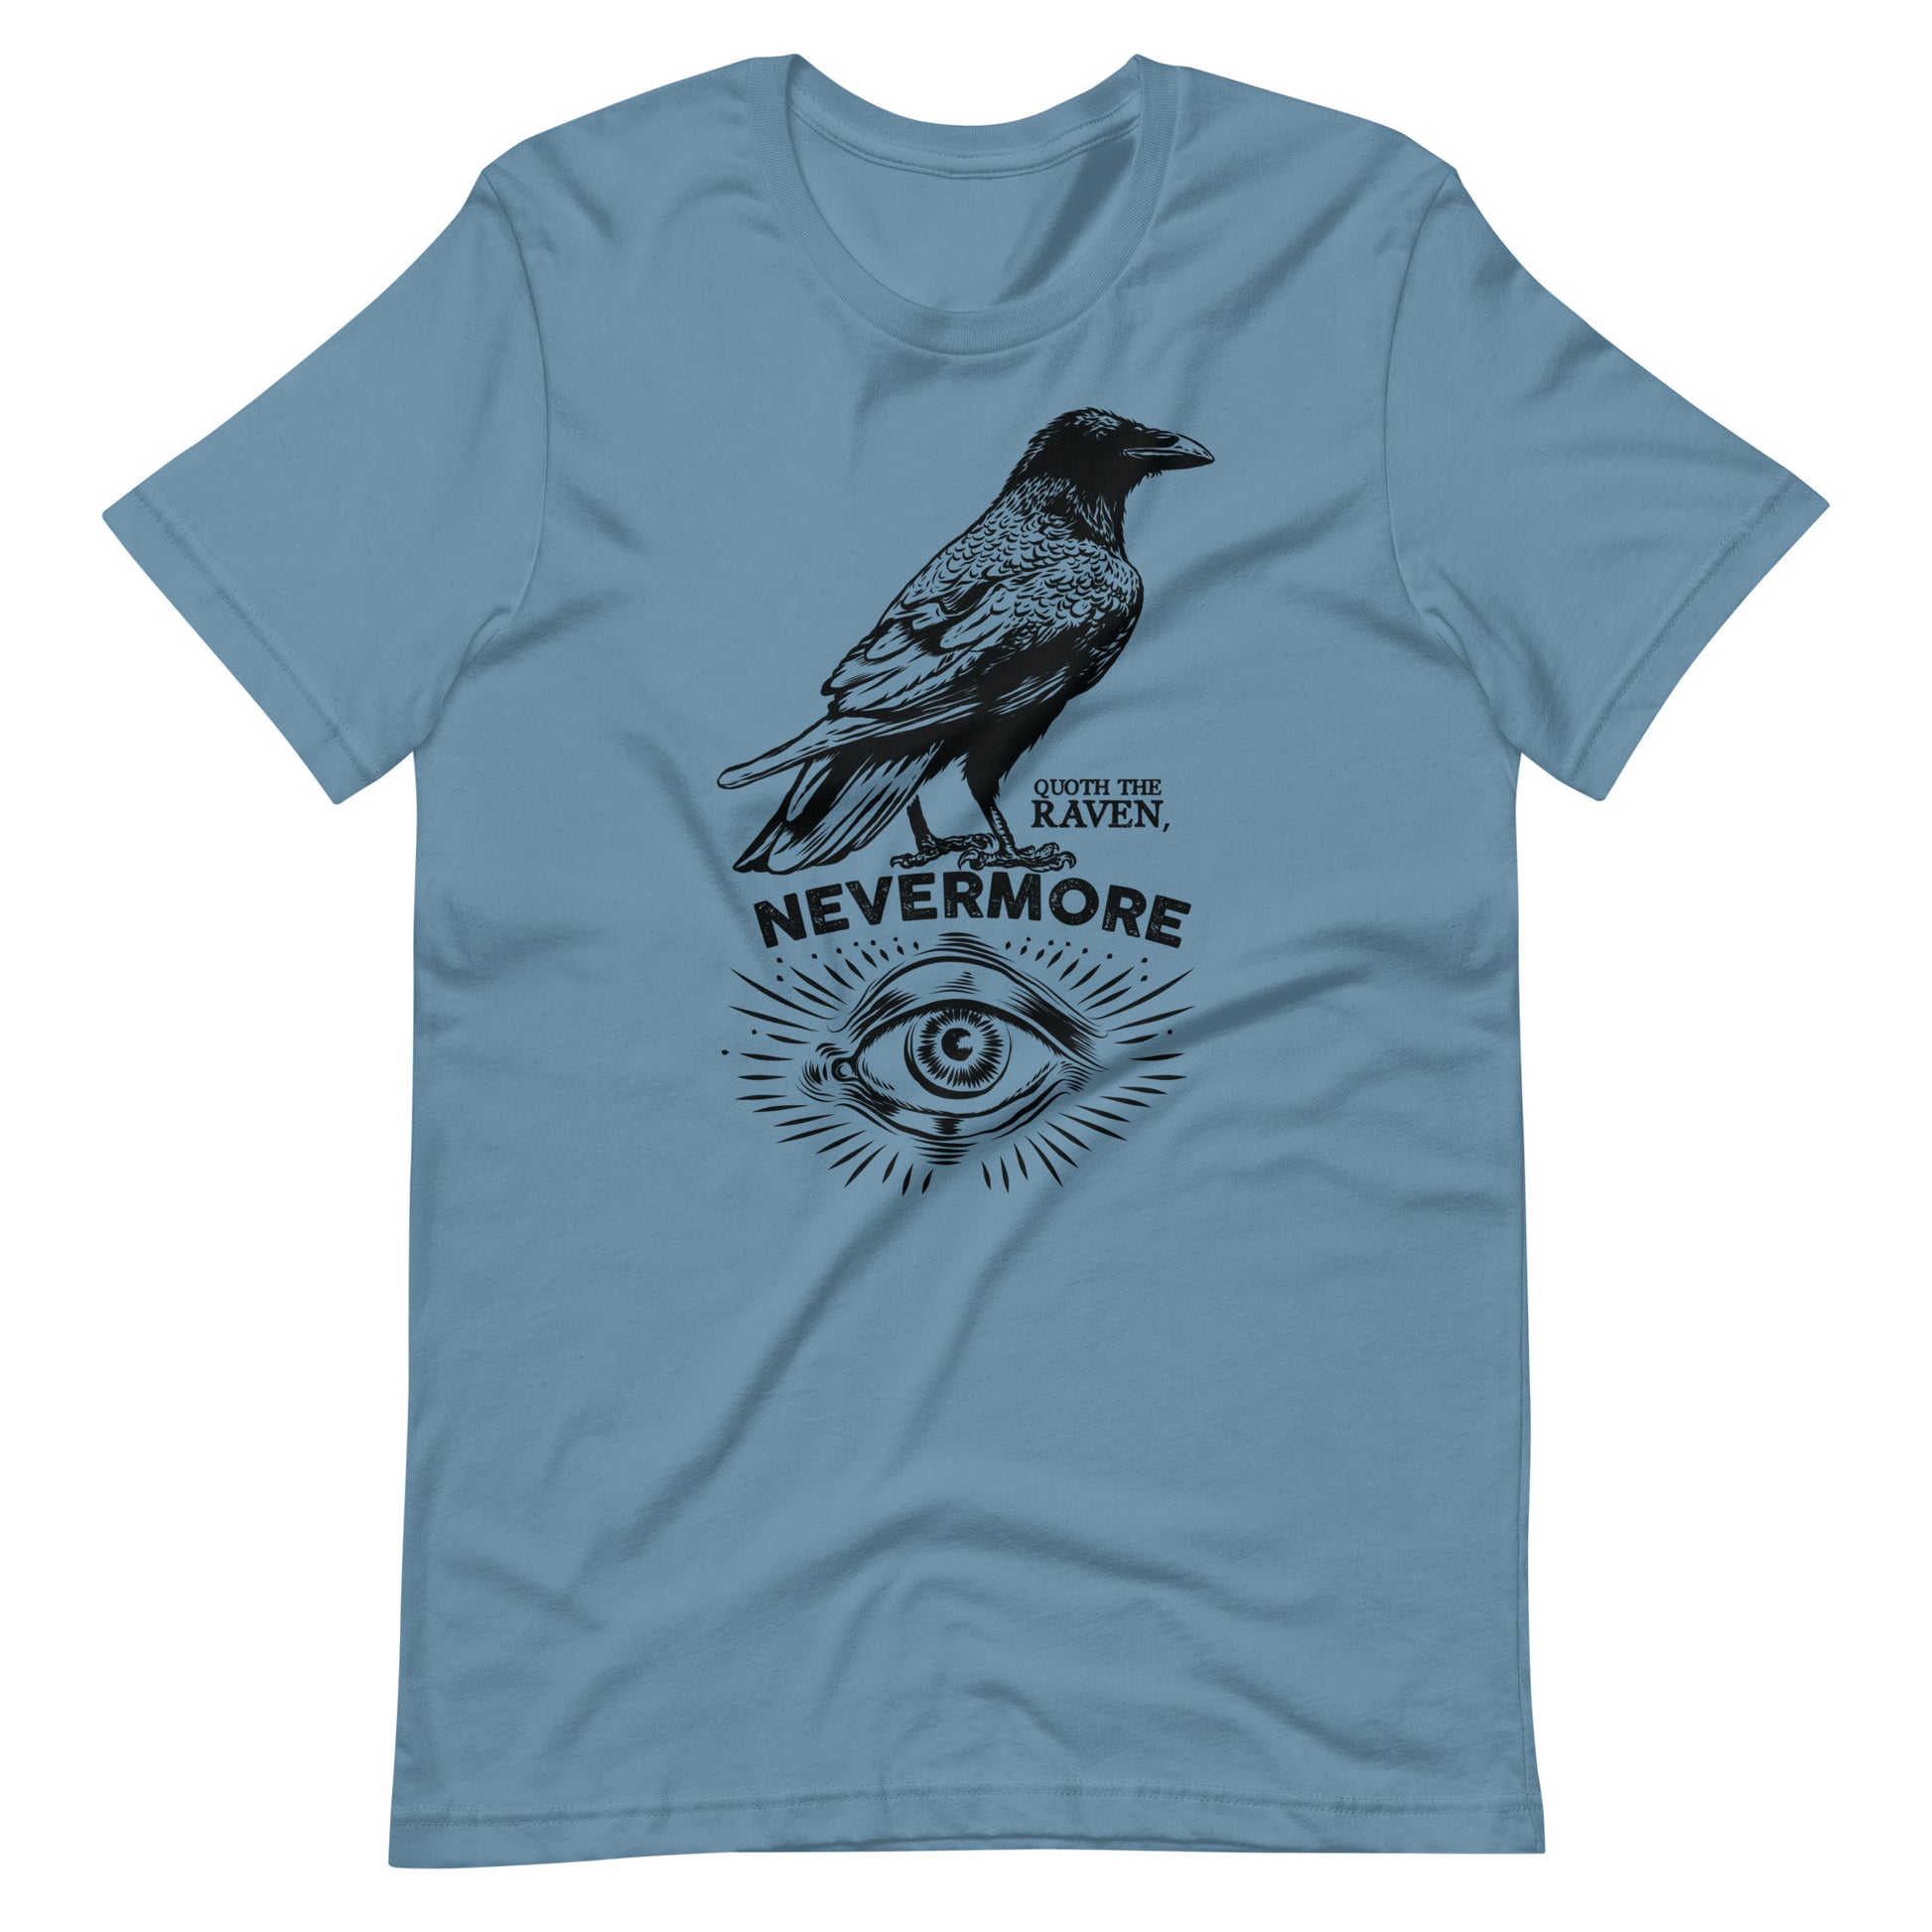 Quoth the Raven Nevermore — my t-shirt